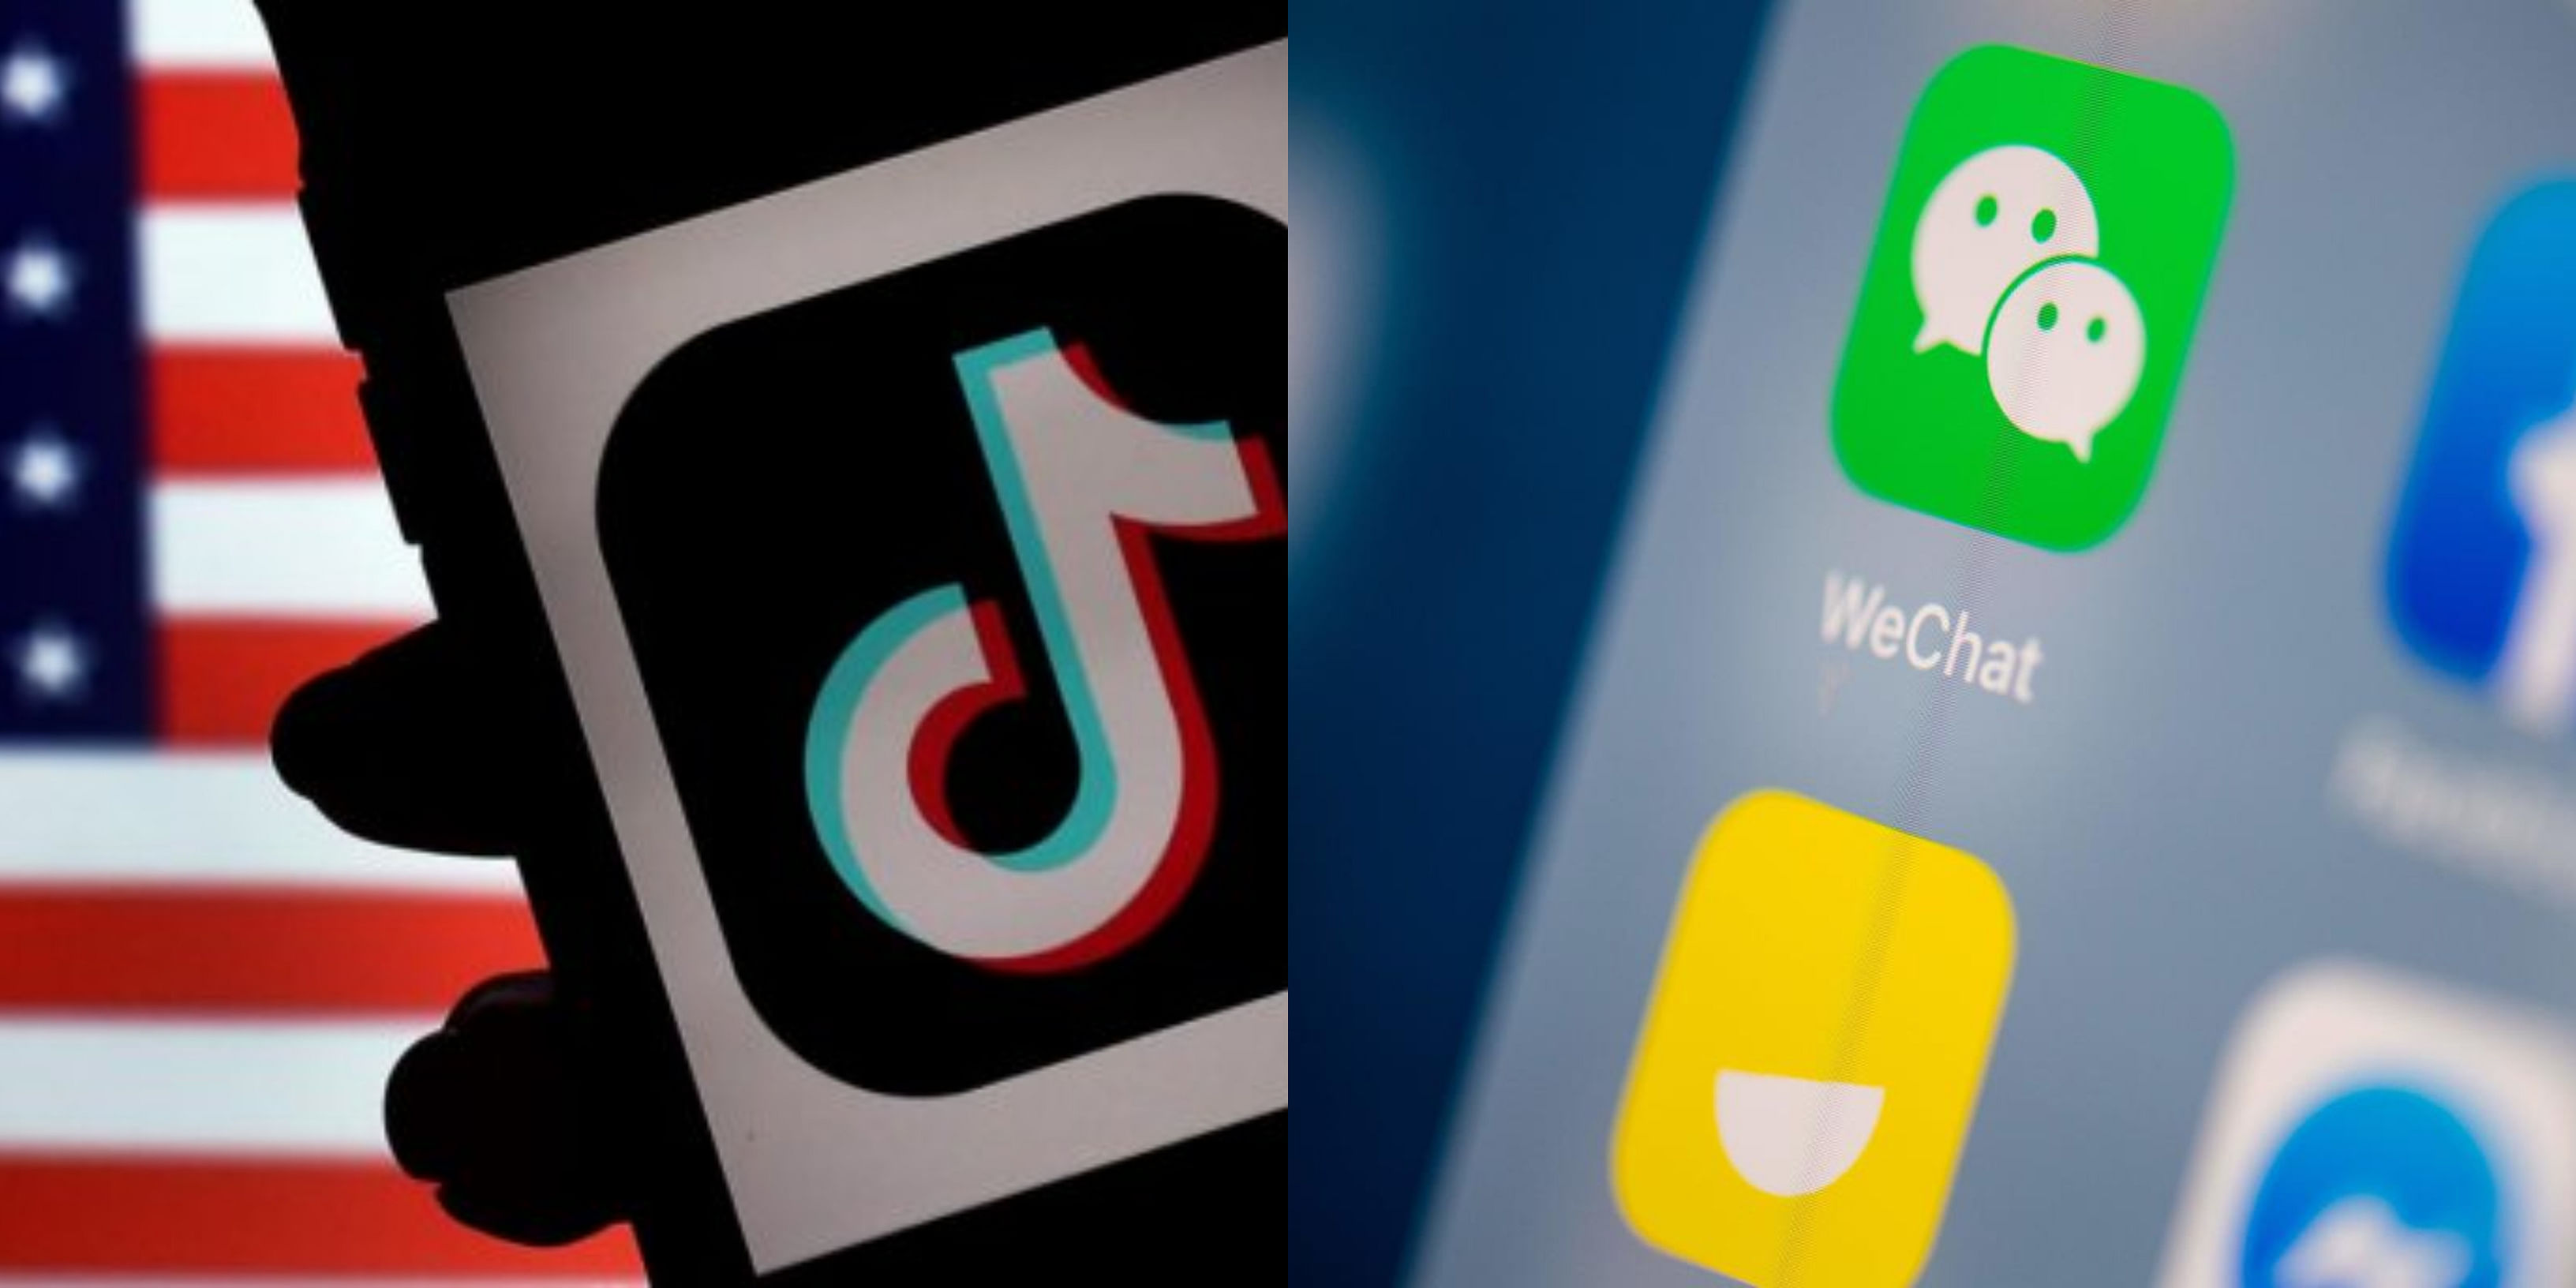 The Trump administration has ramped up efforts to purge “untrusted" Chinese apps from US digital networks and has called TikTok and WeChat “significant threats.” Credit: Reuters